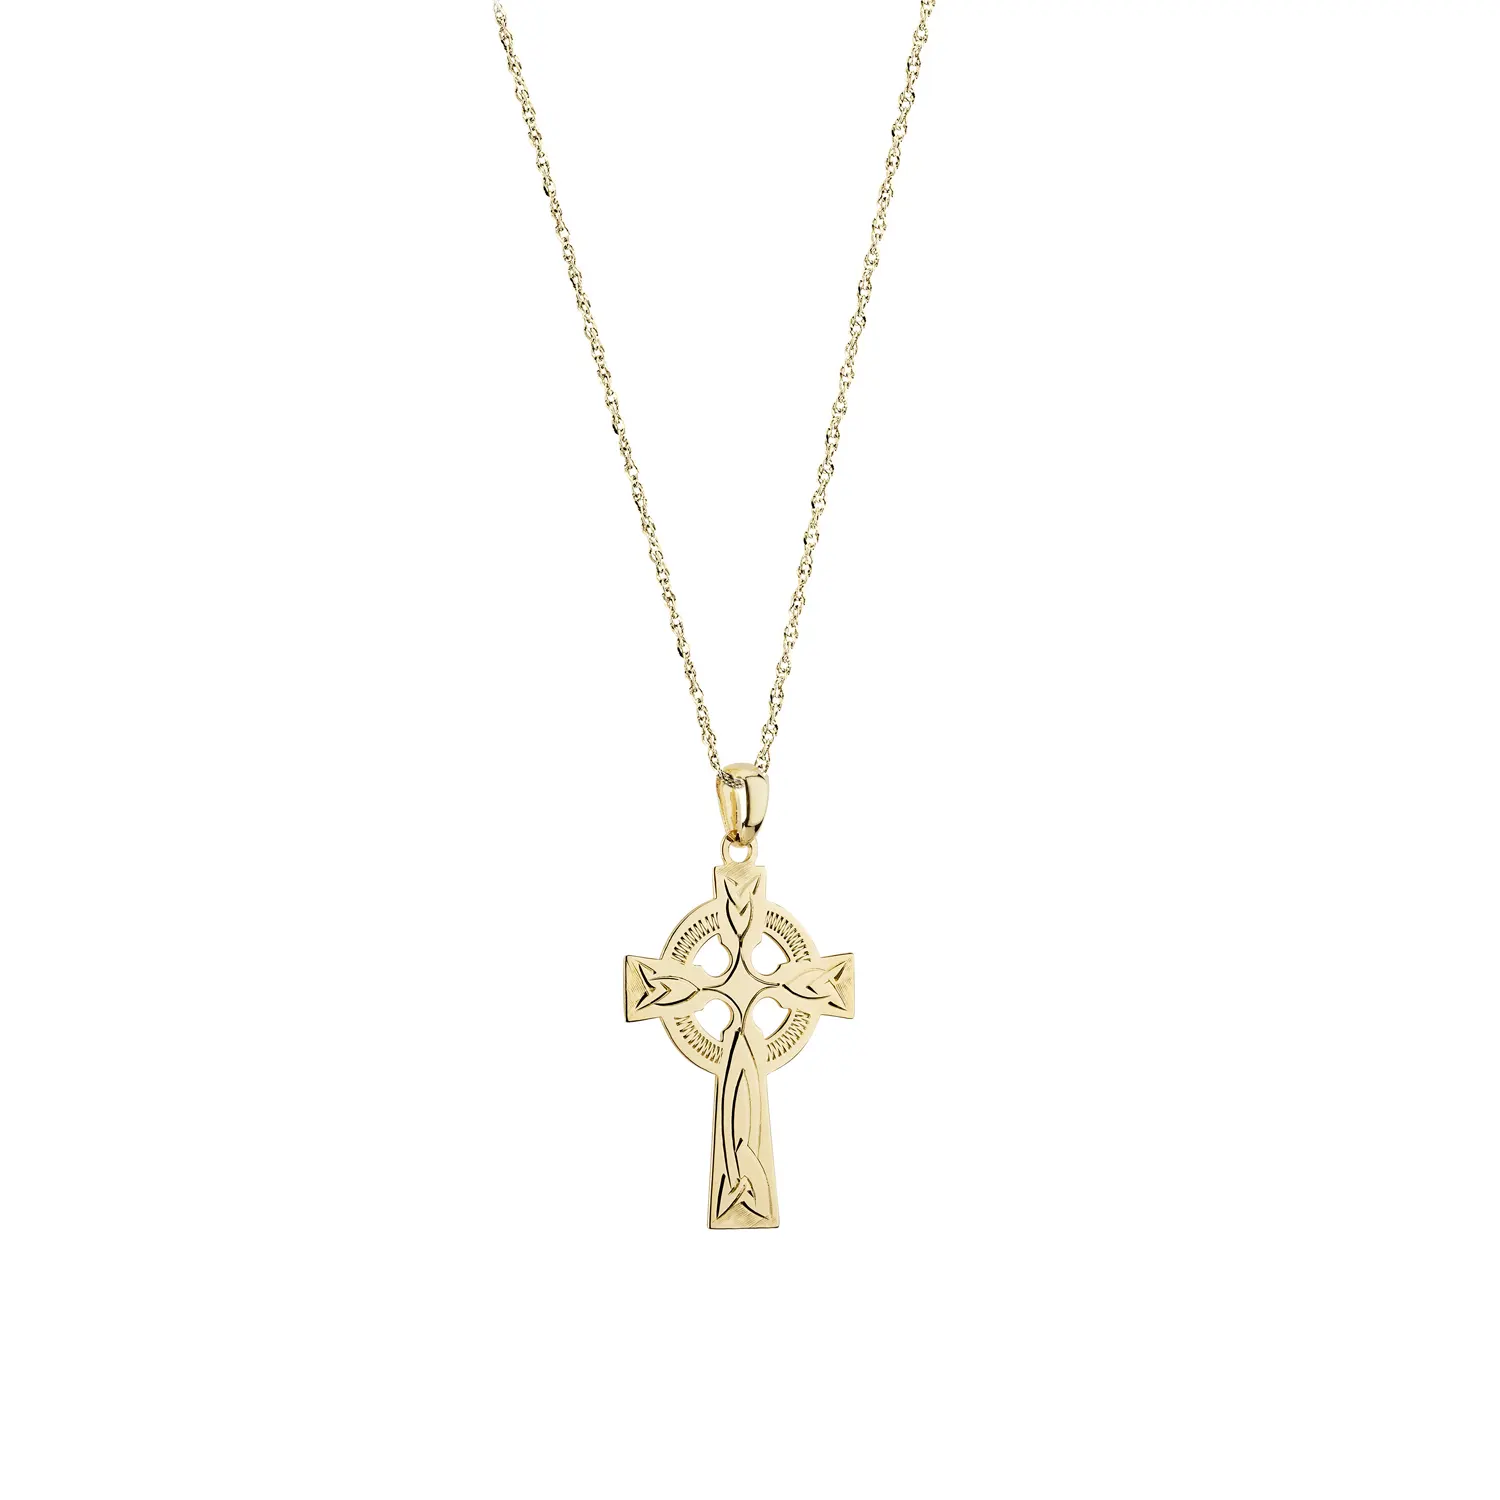 9ct. Yellow Gold Engraved Celtic Cross Necklace